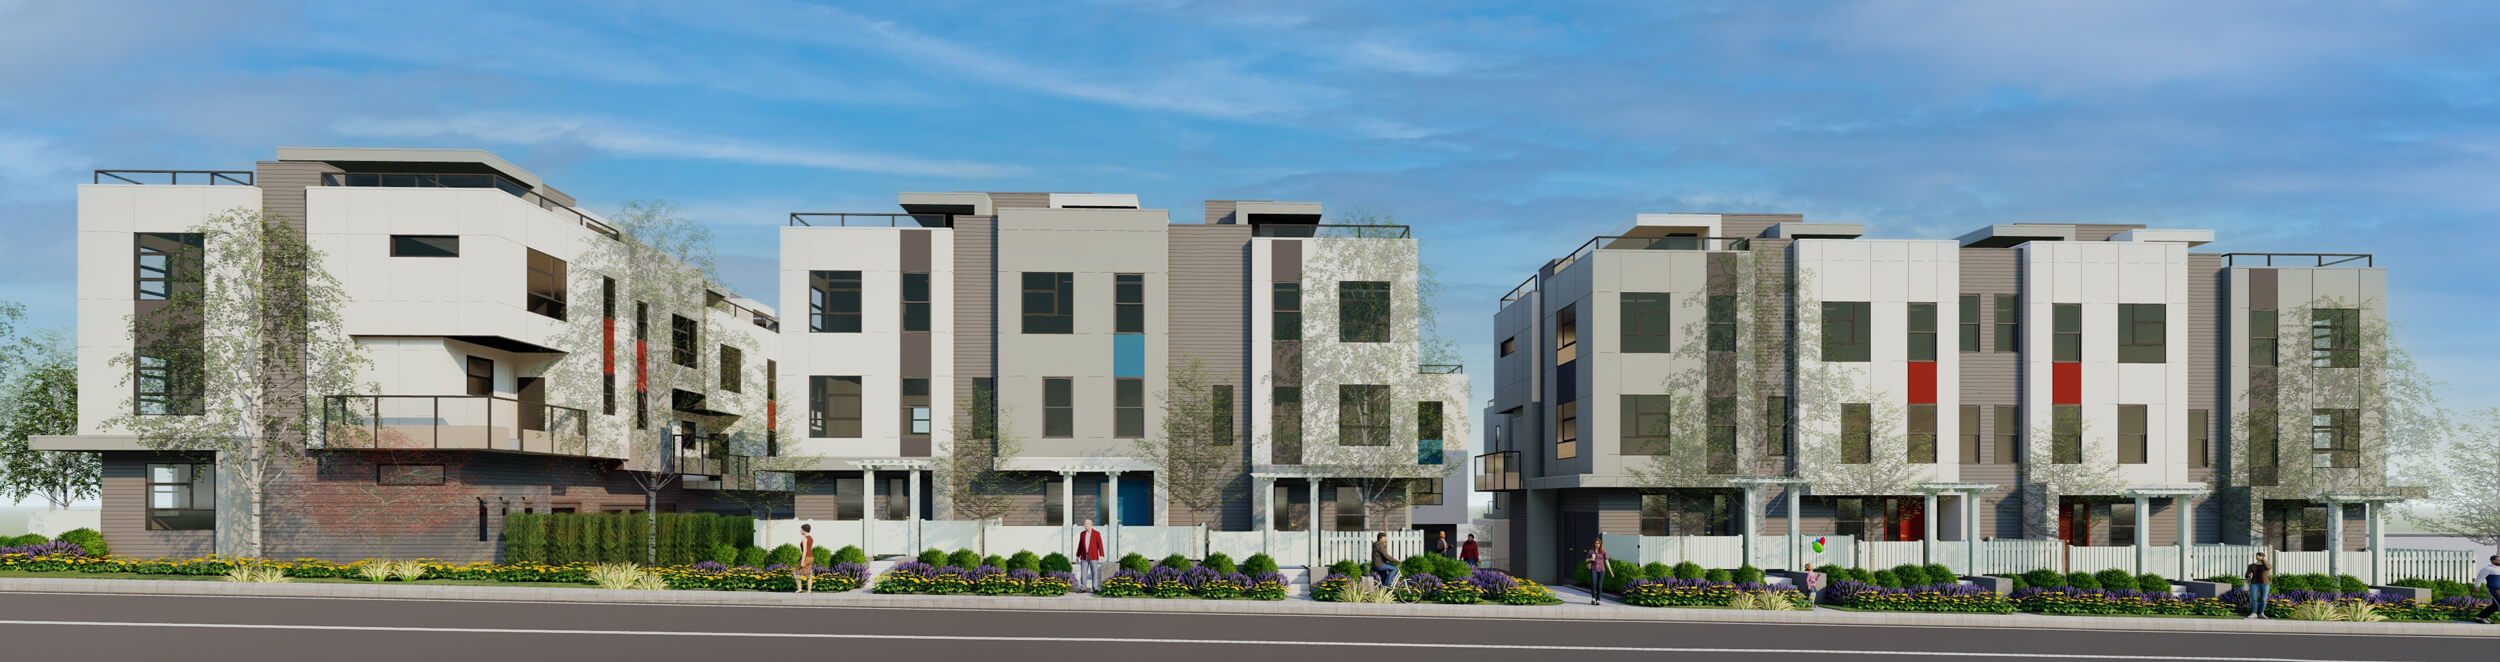 The “Carvolth 1” development is 485 units of residential townhouses in Langley. Design by Group 161 | DF Architecture.